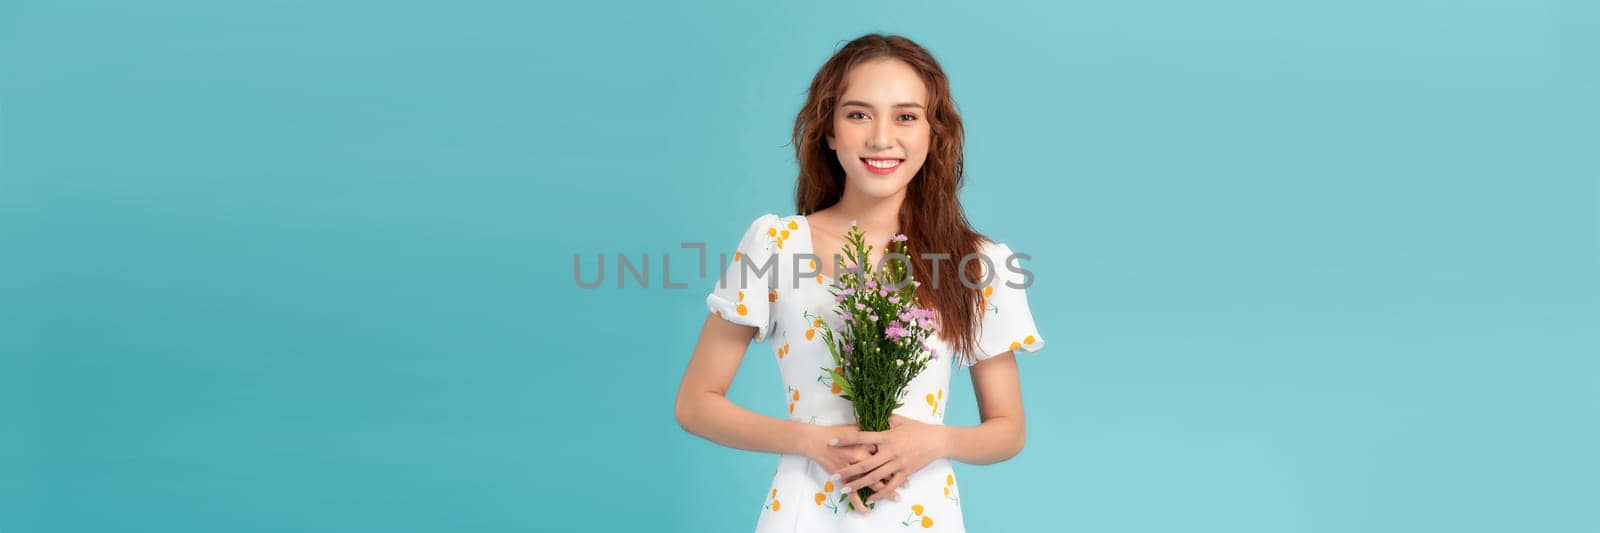 Young beautiful girl with long hair and hat posing with a bouquet of wildflowers. 